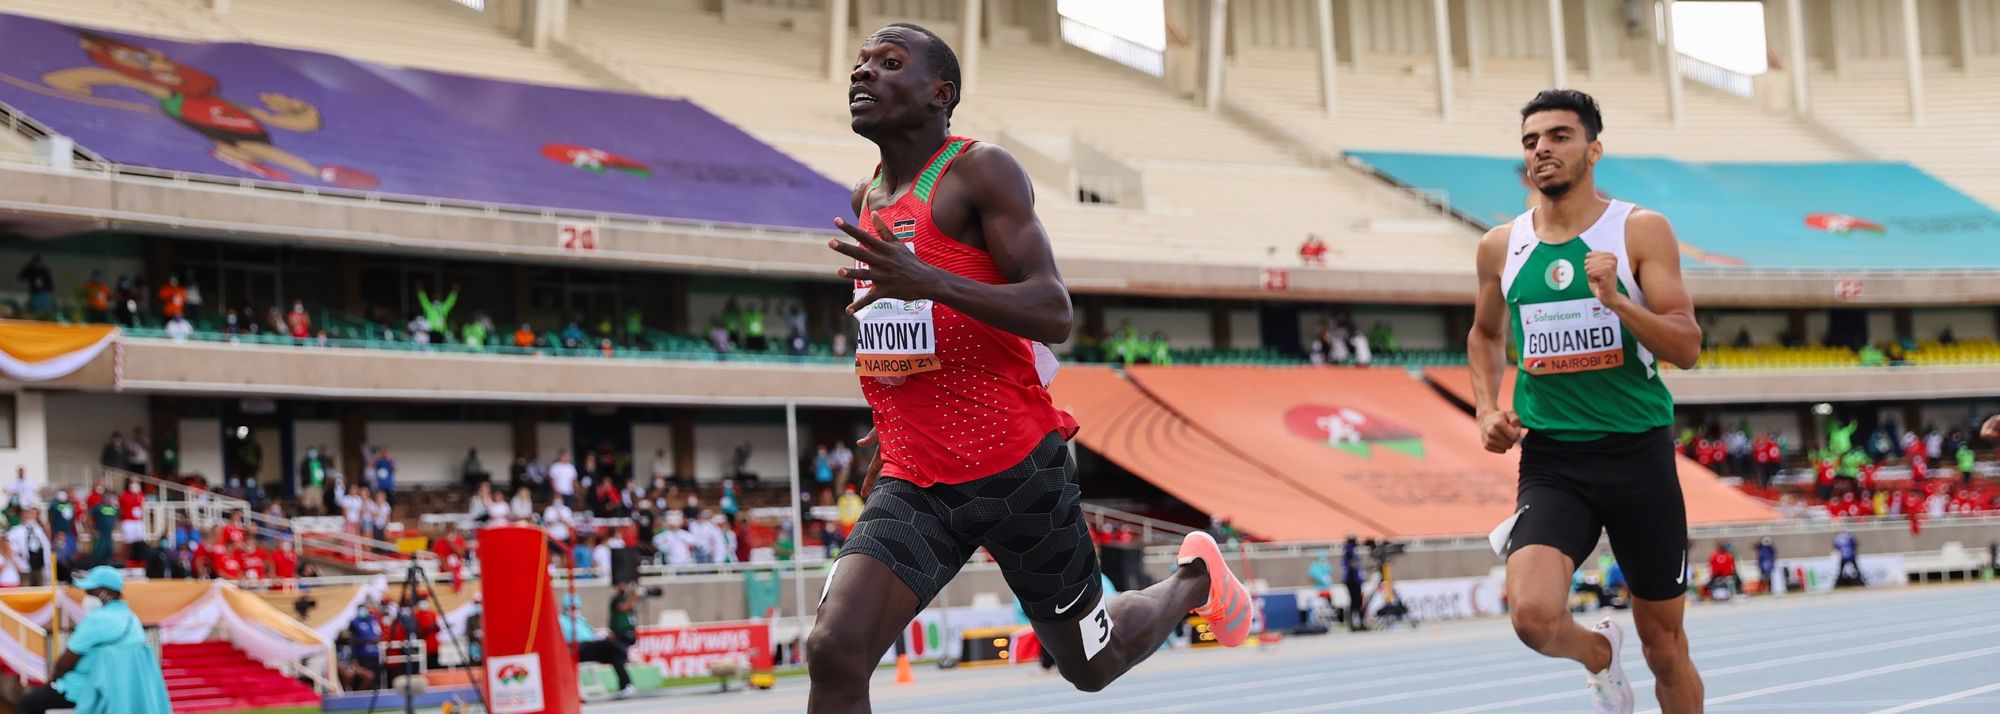 A Kenyan middle distance blitz in the final session today, sparked by Emmanuel Wanyonyi’s superb championship record in the men’s 800m, ensured that the host nation topped the medal tally at the World Athletics U20 Championships in Nairobi.